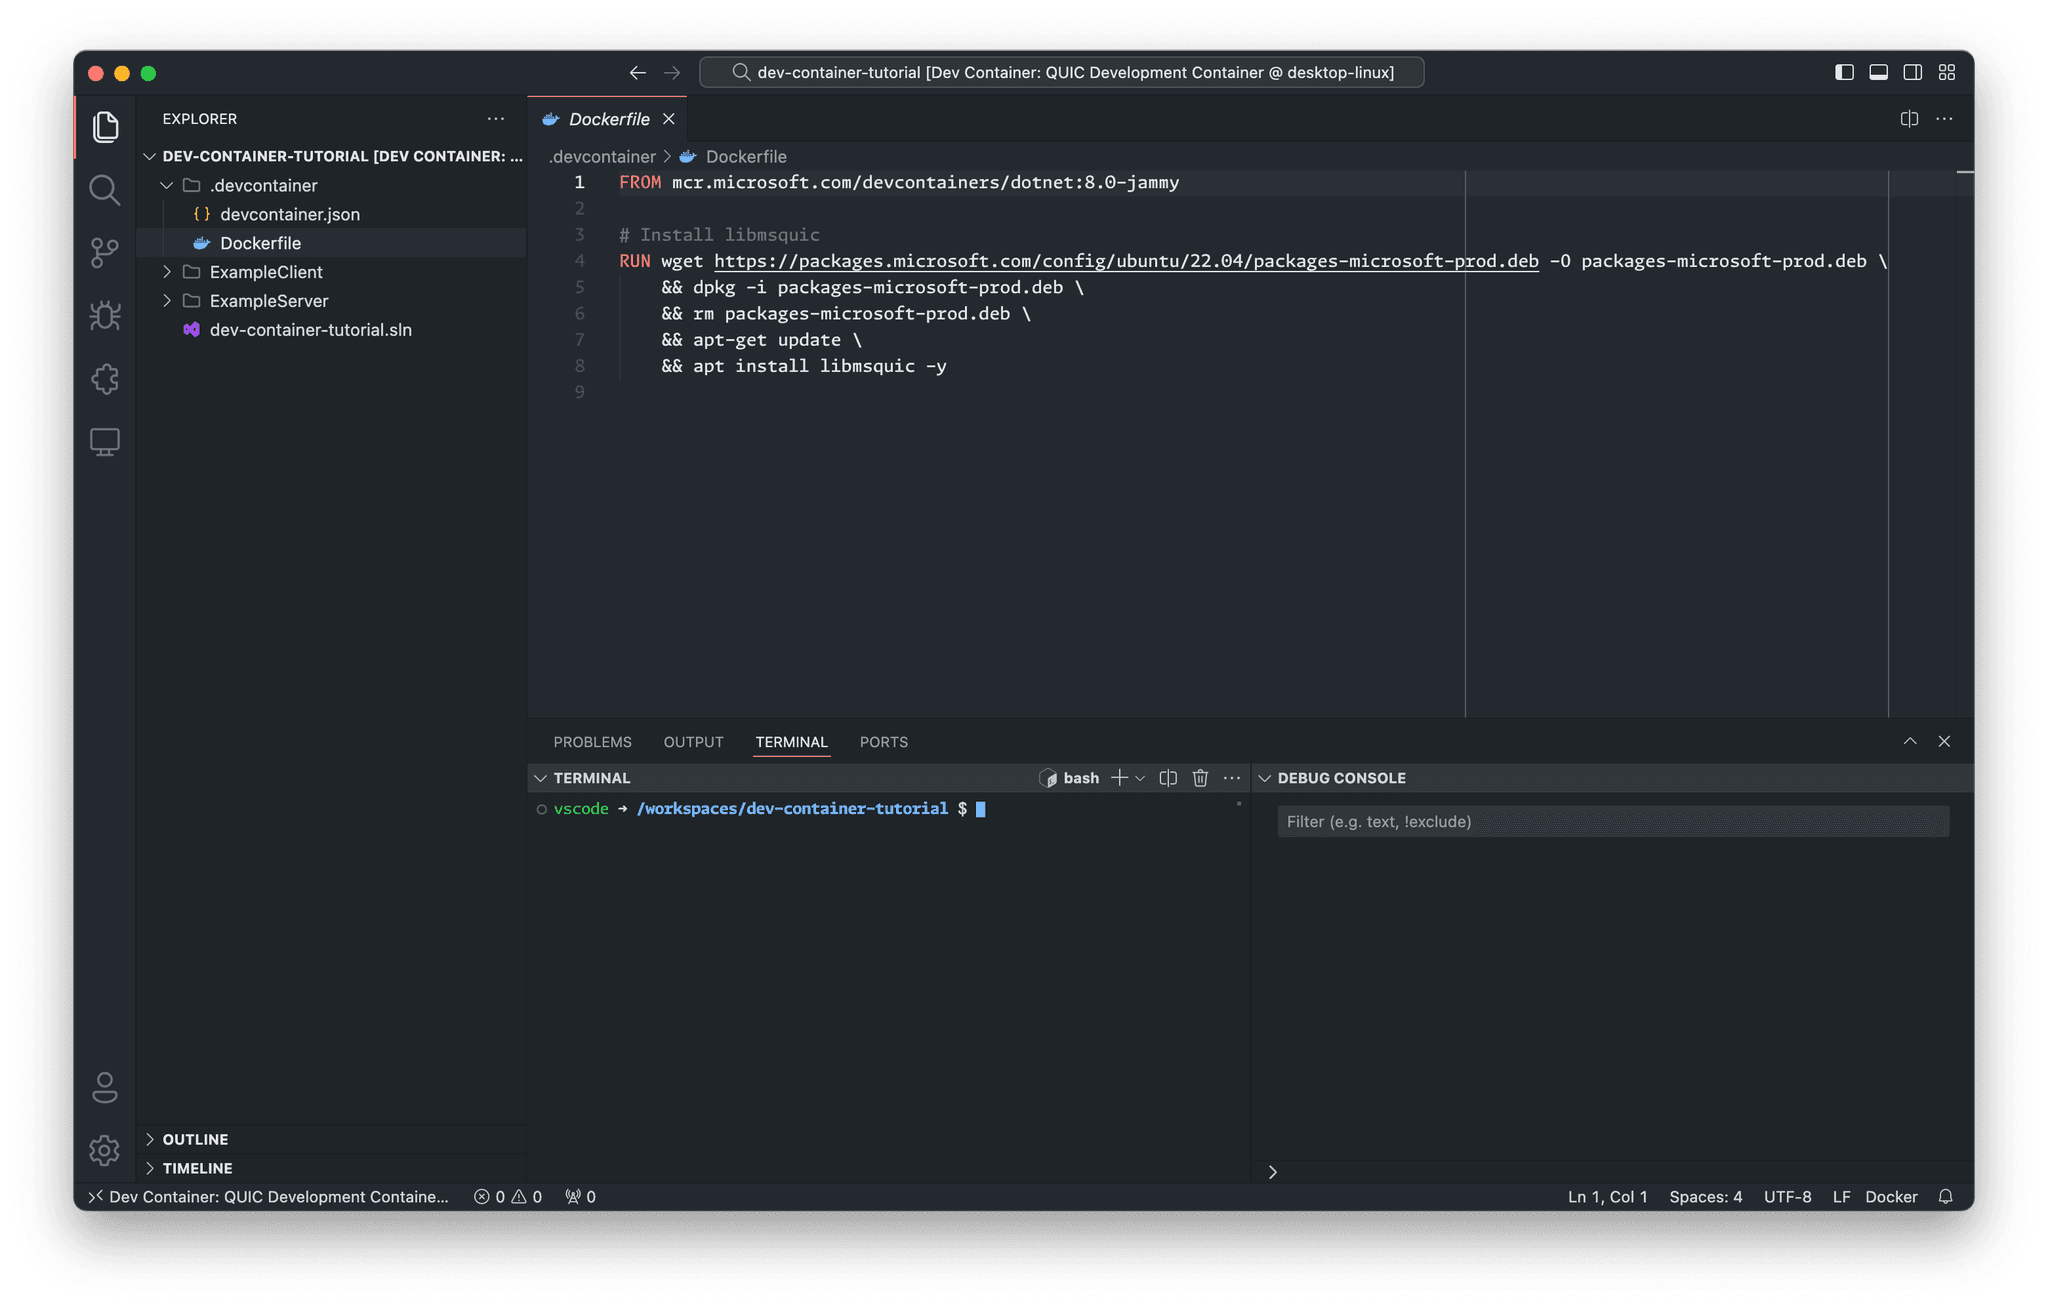 VS Code window with active dev container